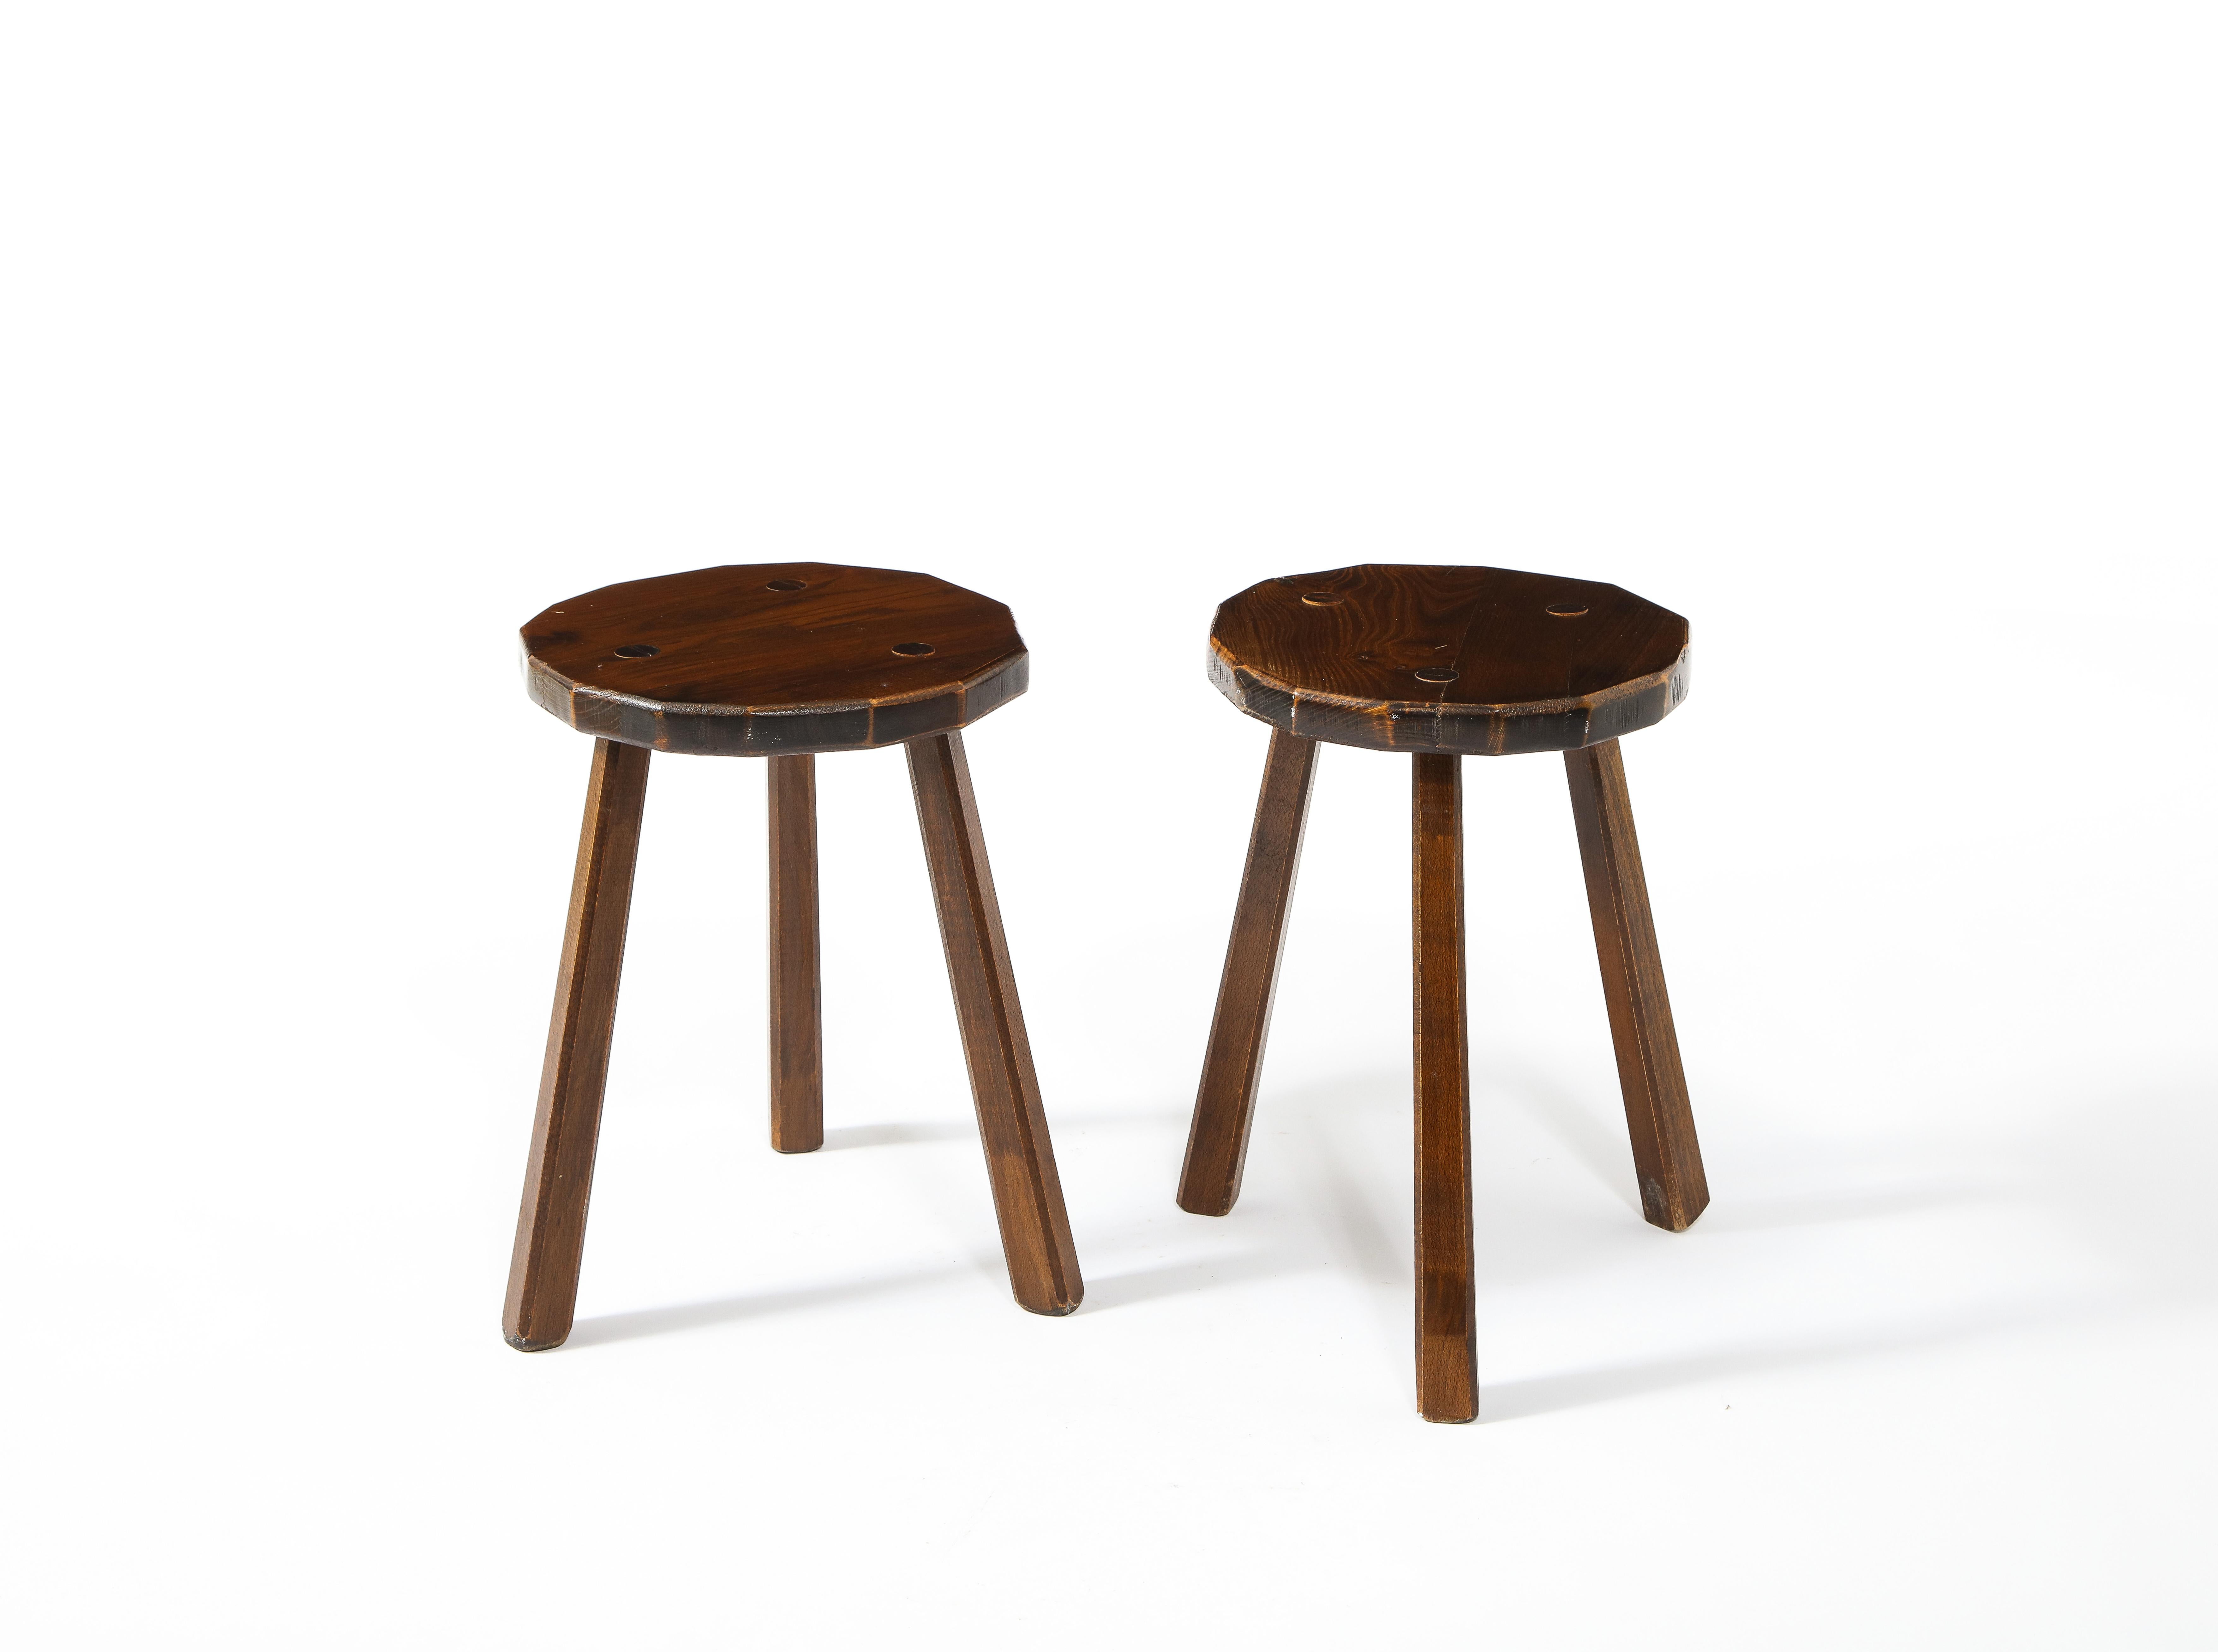 Rustic Splayed Leg Tripodal Faceted Dark Elm Stools, France 1960's For Sale